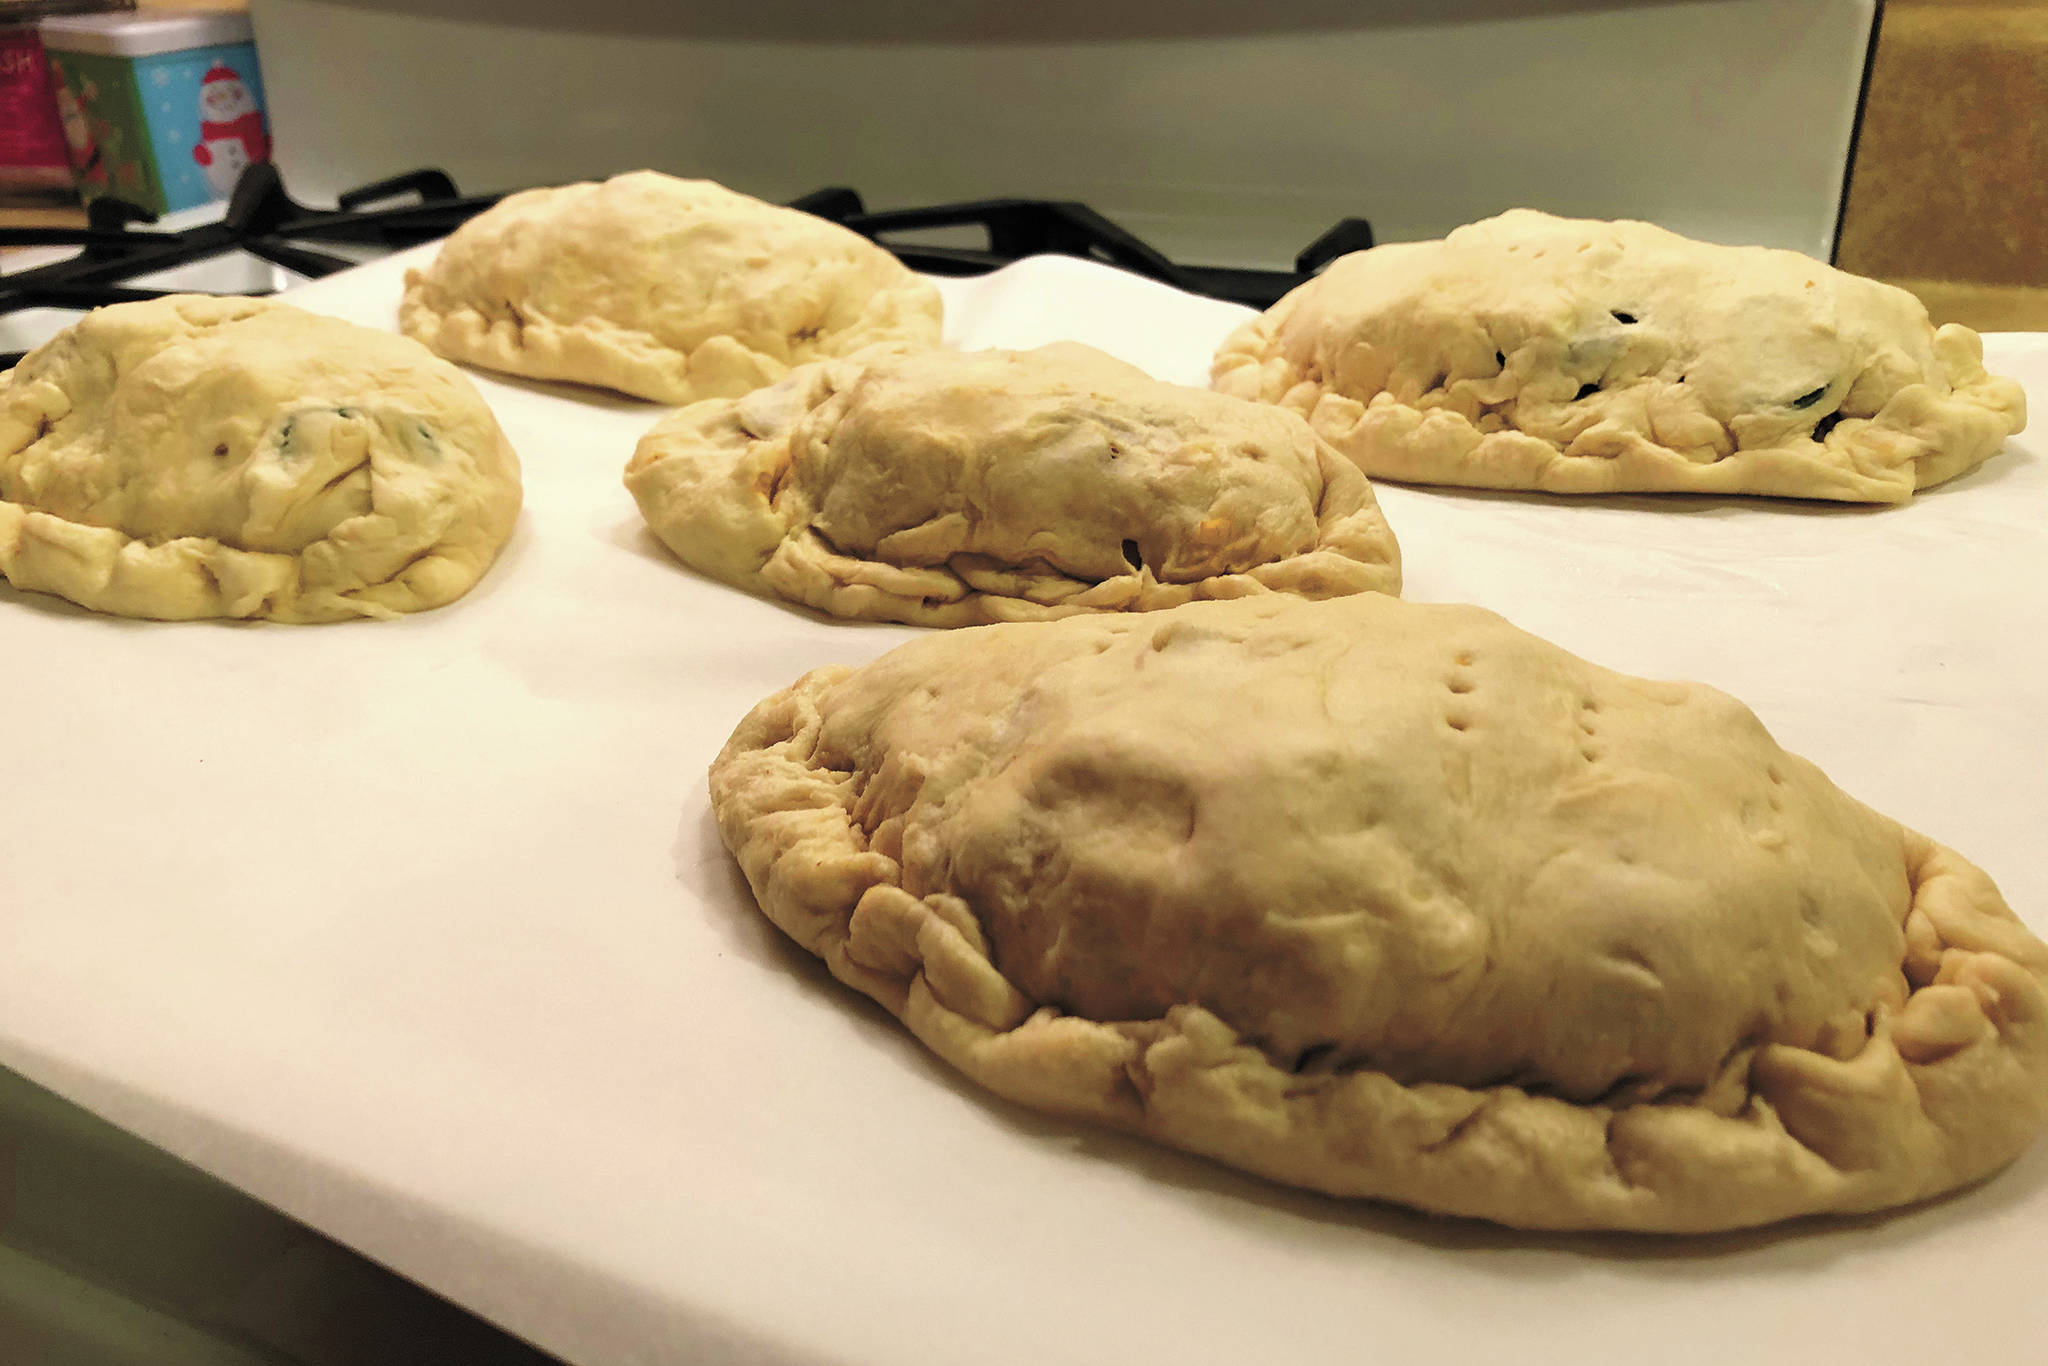 The dough for this batch of pasties was stickier than usual, resulting in less than perfect formation and crimping, seen here Christmas Day, Dec. 25, 2020 in Crystal Falls, Michigan. An example of substance over style. (Photo by Megan Pacer/Homer News)